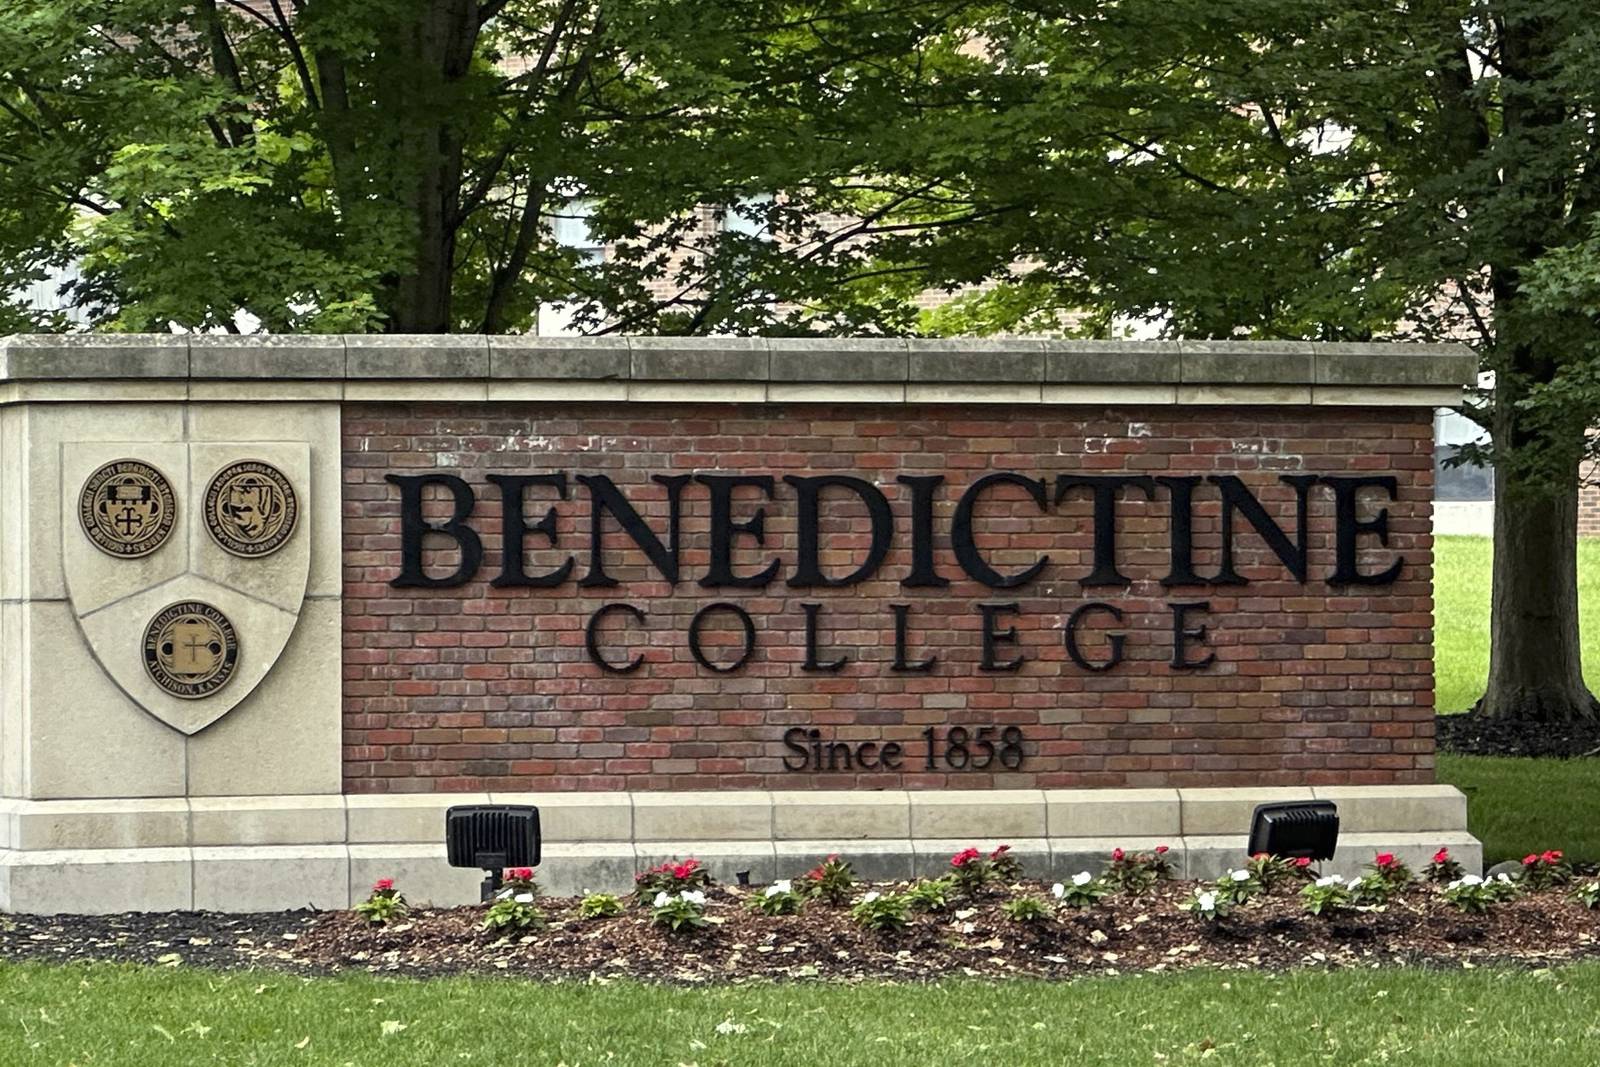 Why the speech by Kansas City Chiefs kicker was embraced at Benedictine